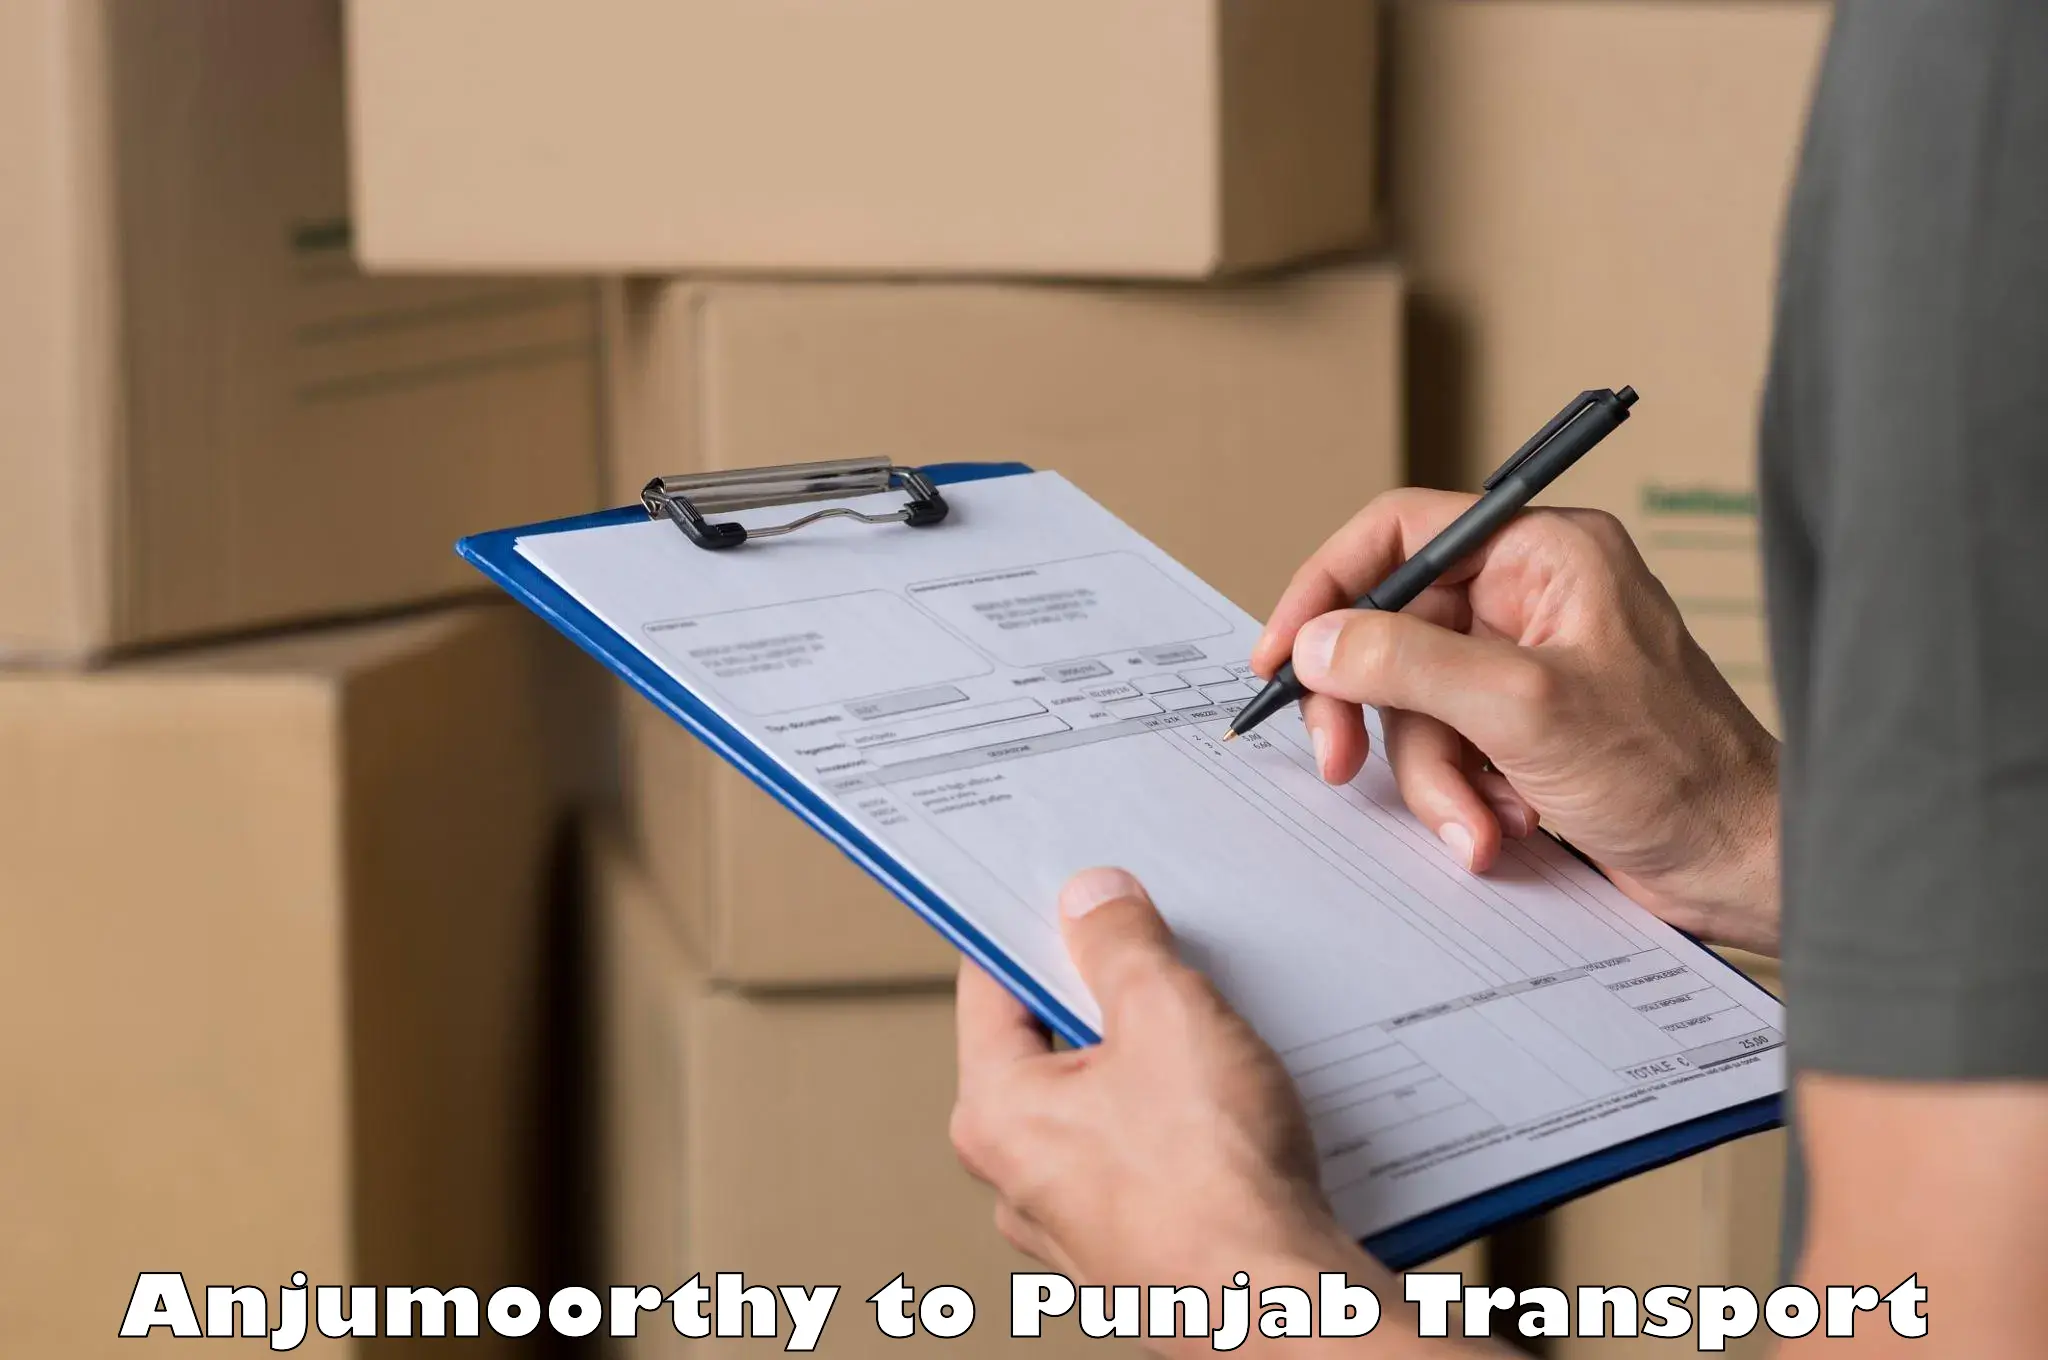 Package delivery services Anjumoorthy to Jalandhar